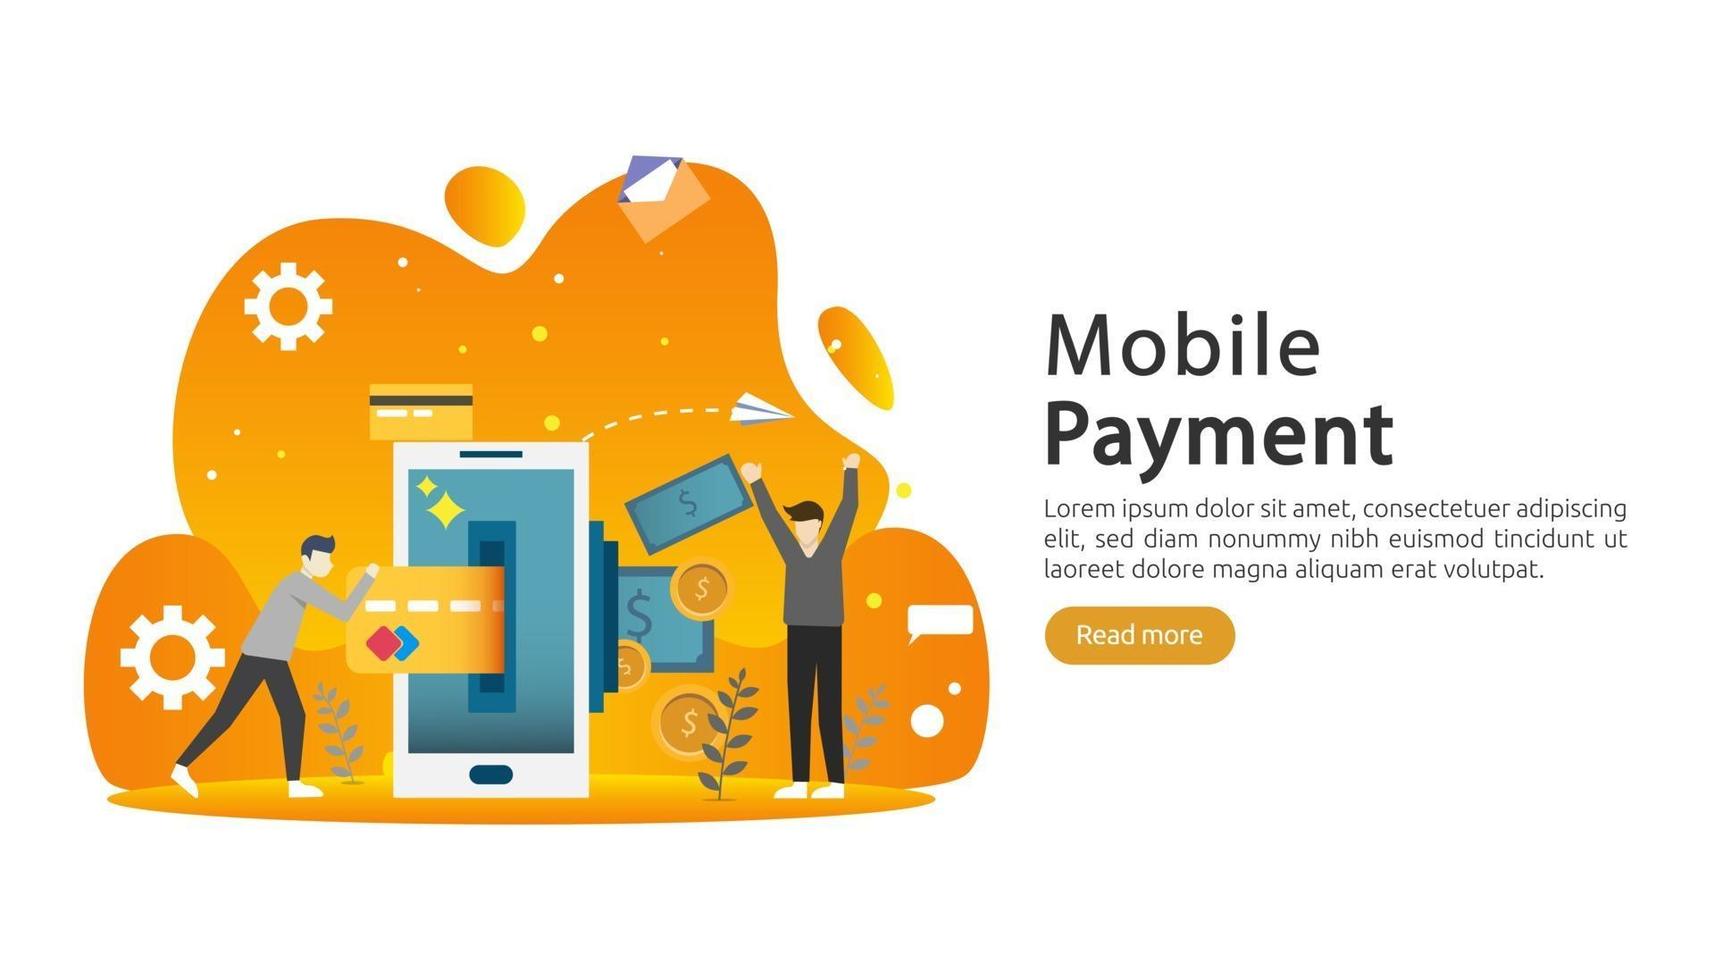 mobile payment or money transfer concept. E-commerce market shopping online illustration with tiny people character. template for web landing page, banner, presentation, social media, print media vector